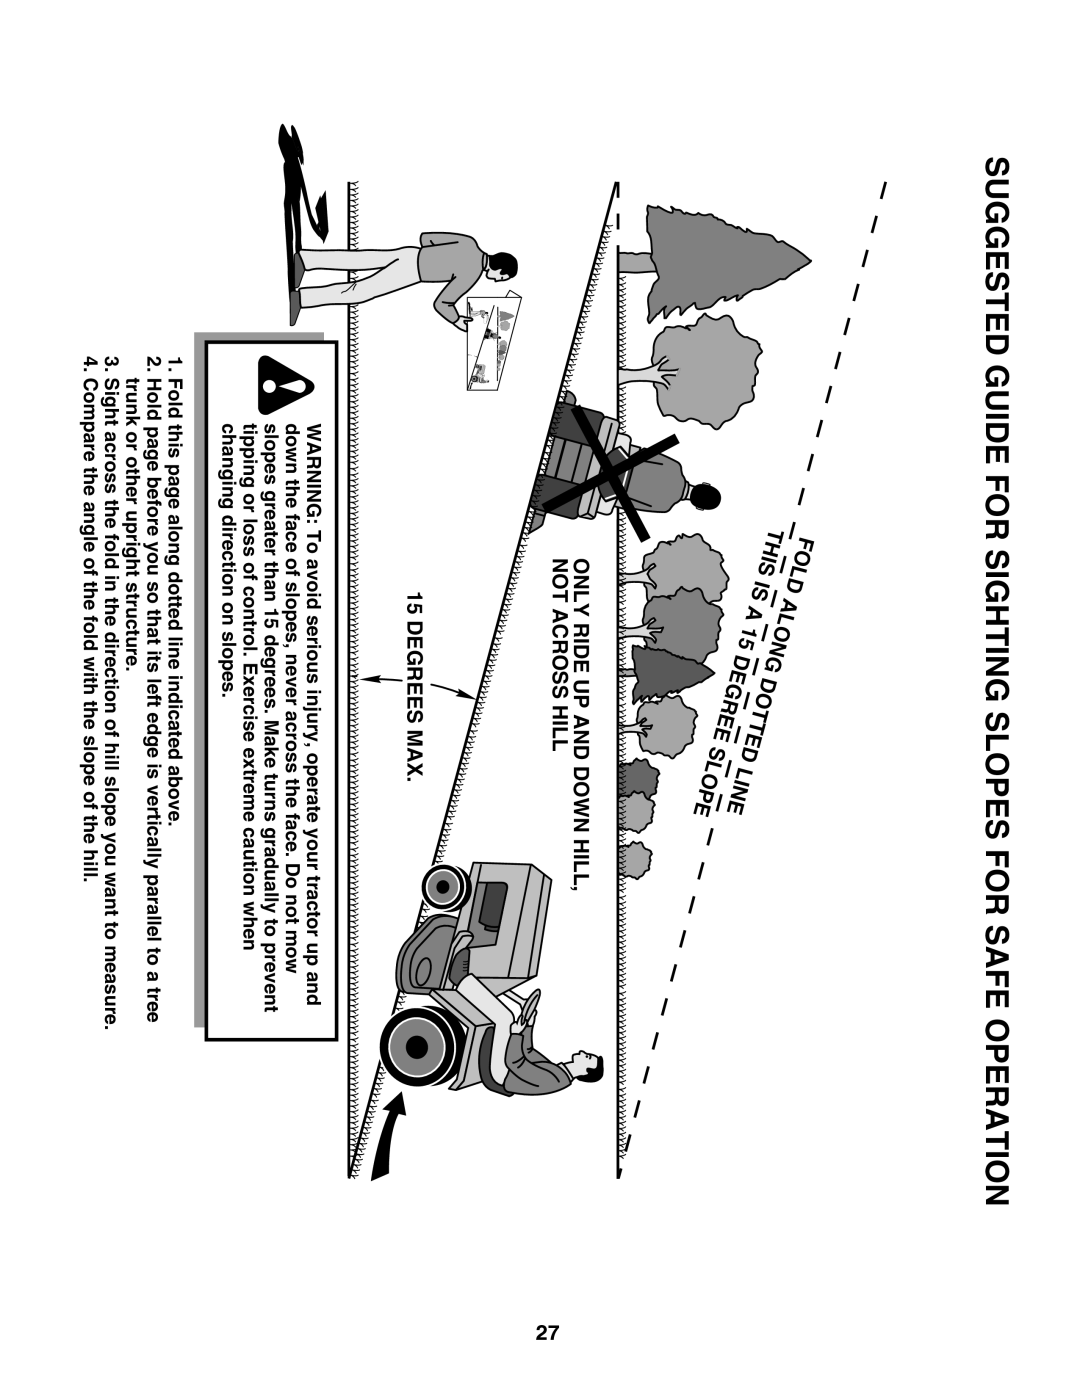 Poulan 96018000500, 532 43 88-96 manual Suggested Guide for Sighting Slopes for Safe Operation 